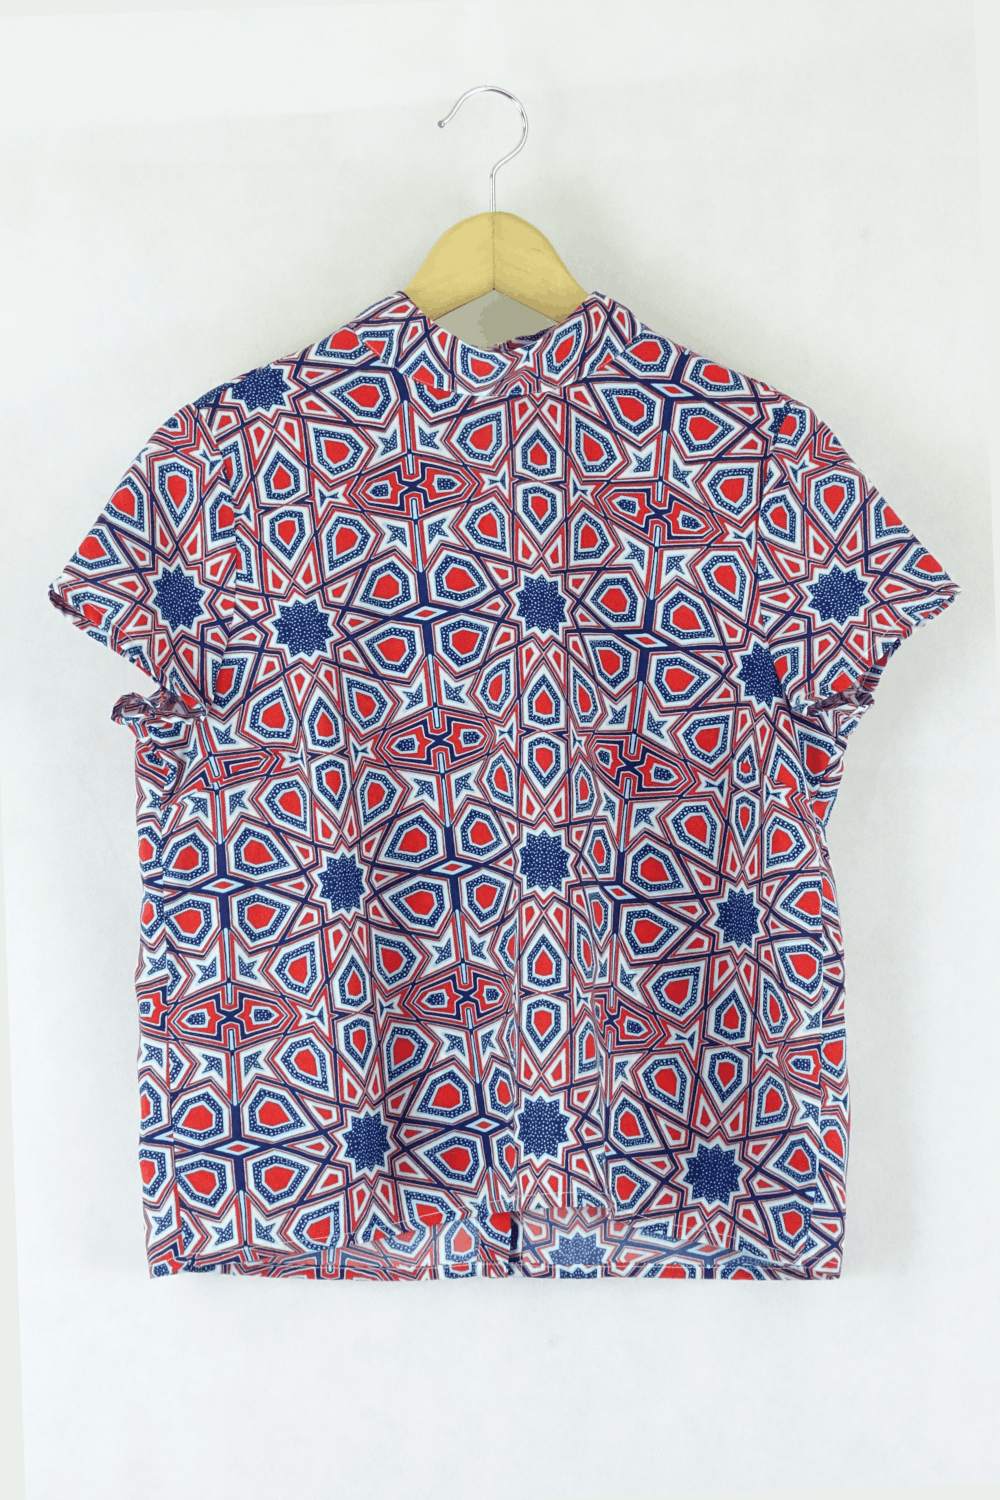 Monk Patterned Red And Blue Top S